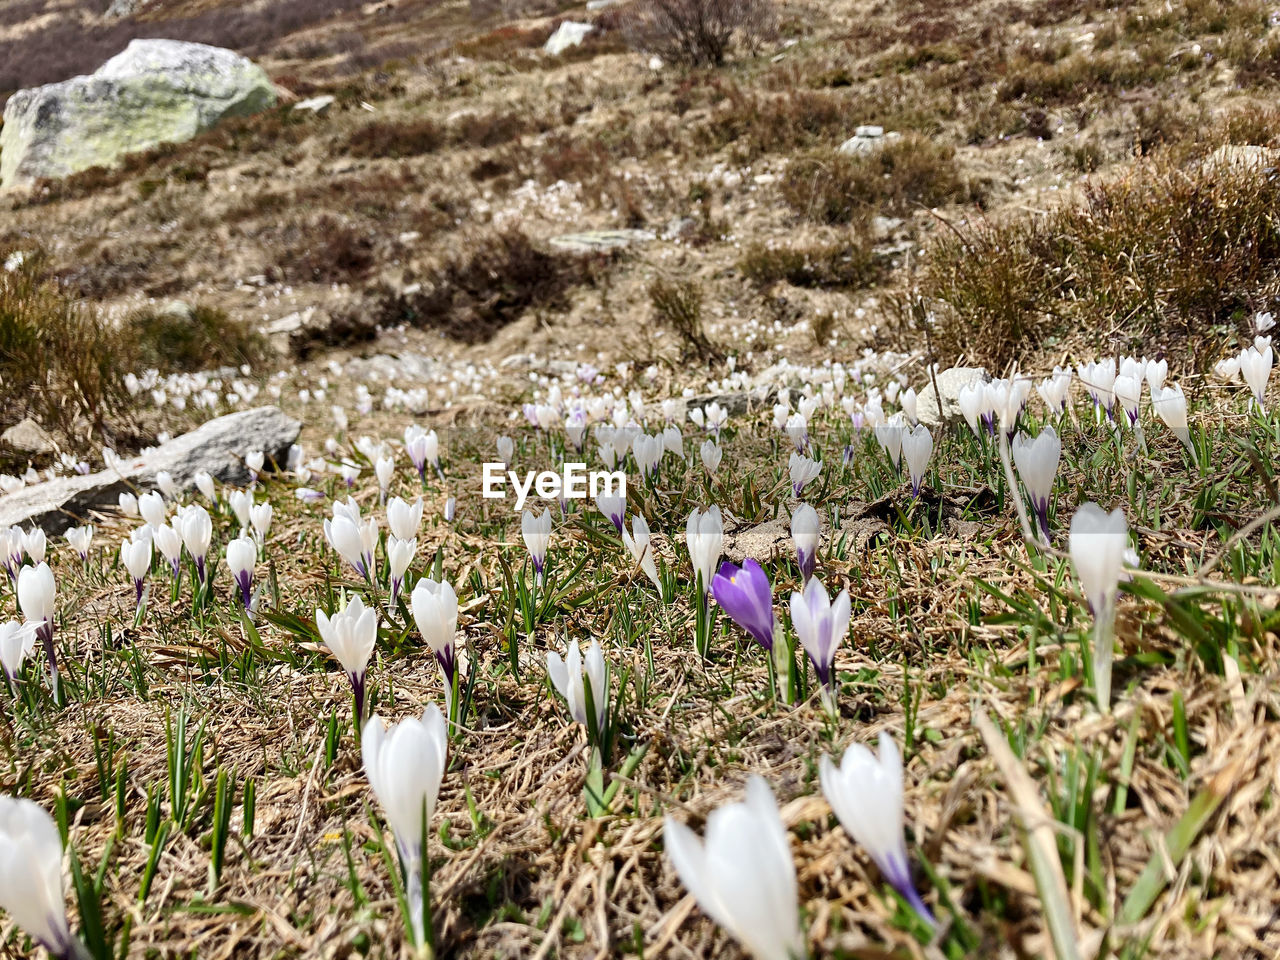 plant, flower, beauty in nature, land, flowering plant, nature, white, growth, field, snowdrop, no people, day, freshness, fragility, wildflower, tranquility, crocus, outdoors, high angle view, grass, close-up, environment, sunlight, landscape, petal